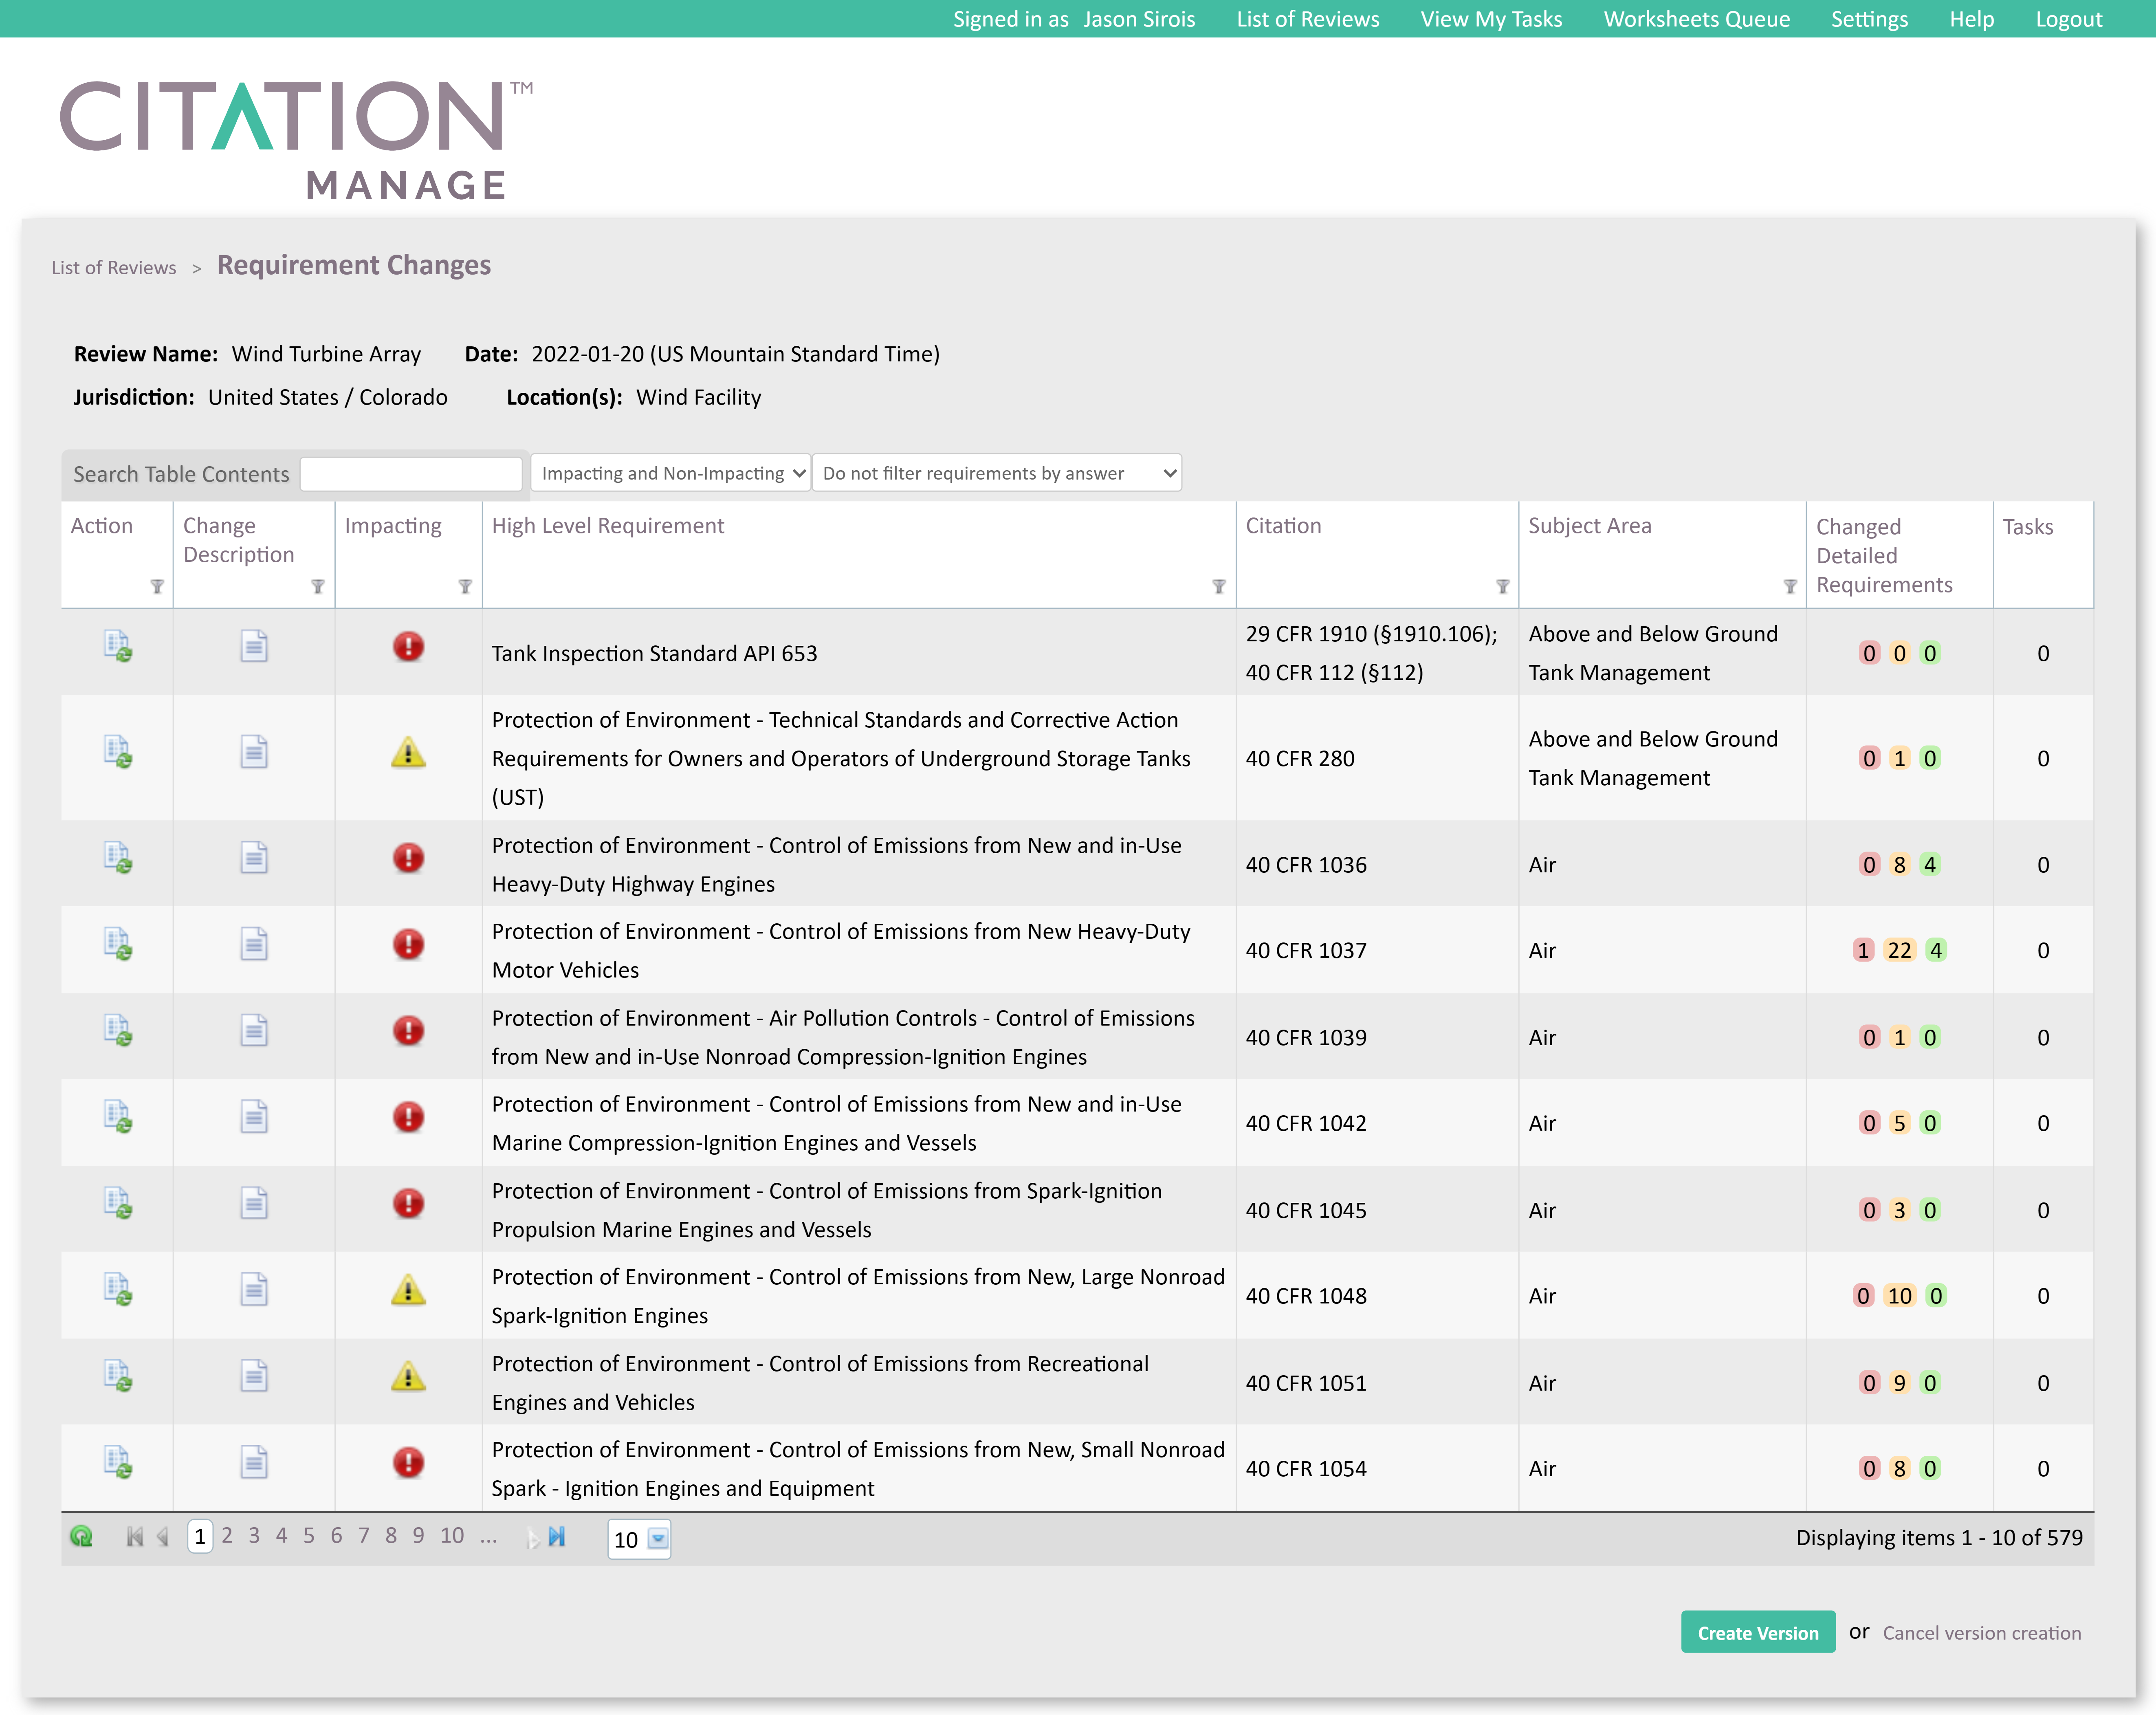 Citation Manage™ ensures effective compliance management by documenting changes to compliance programs. This feature records clear details of changes, including reasons, impact, and implementation steps, reducing the risk of non-compliance and penalties.